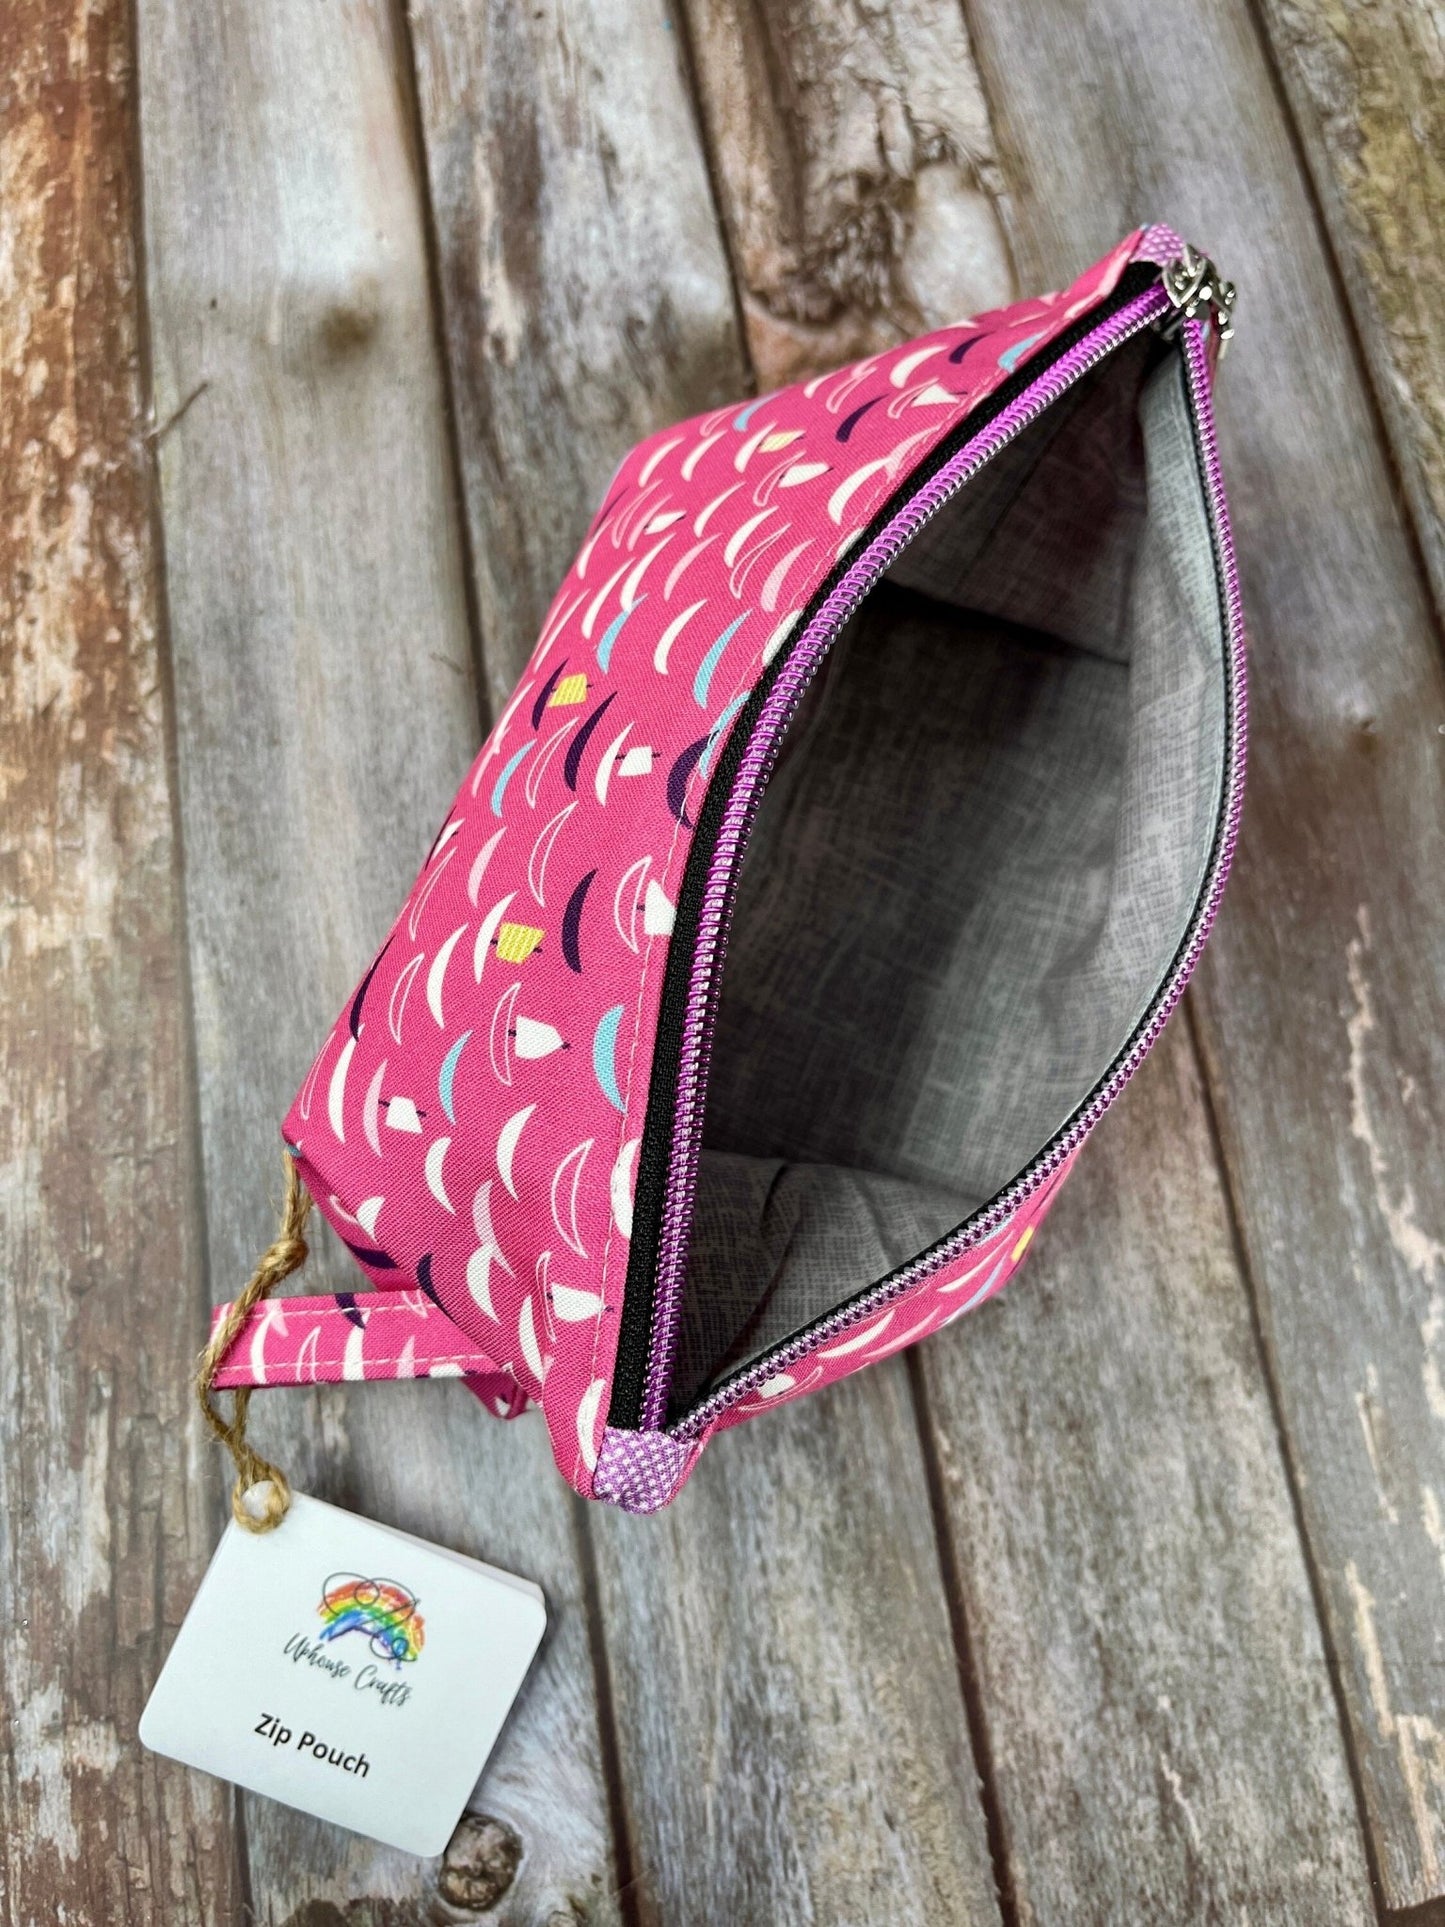 Pink Sailing Boat Make Up Pouch, Pencil Case - Uphouse Crafts